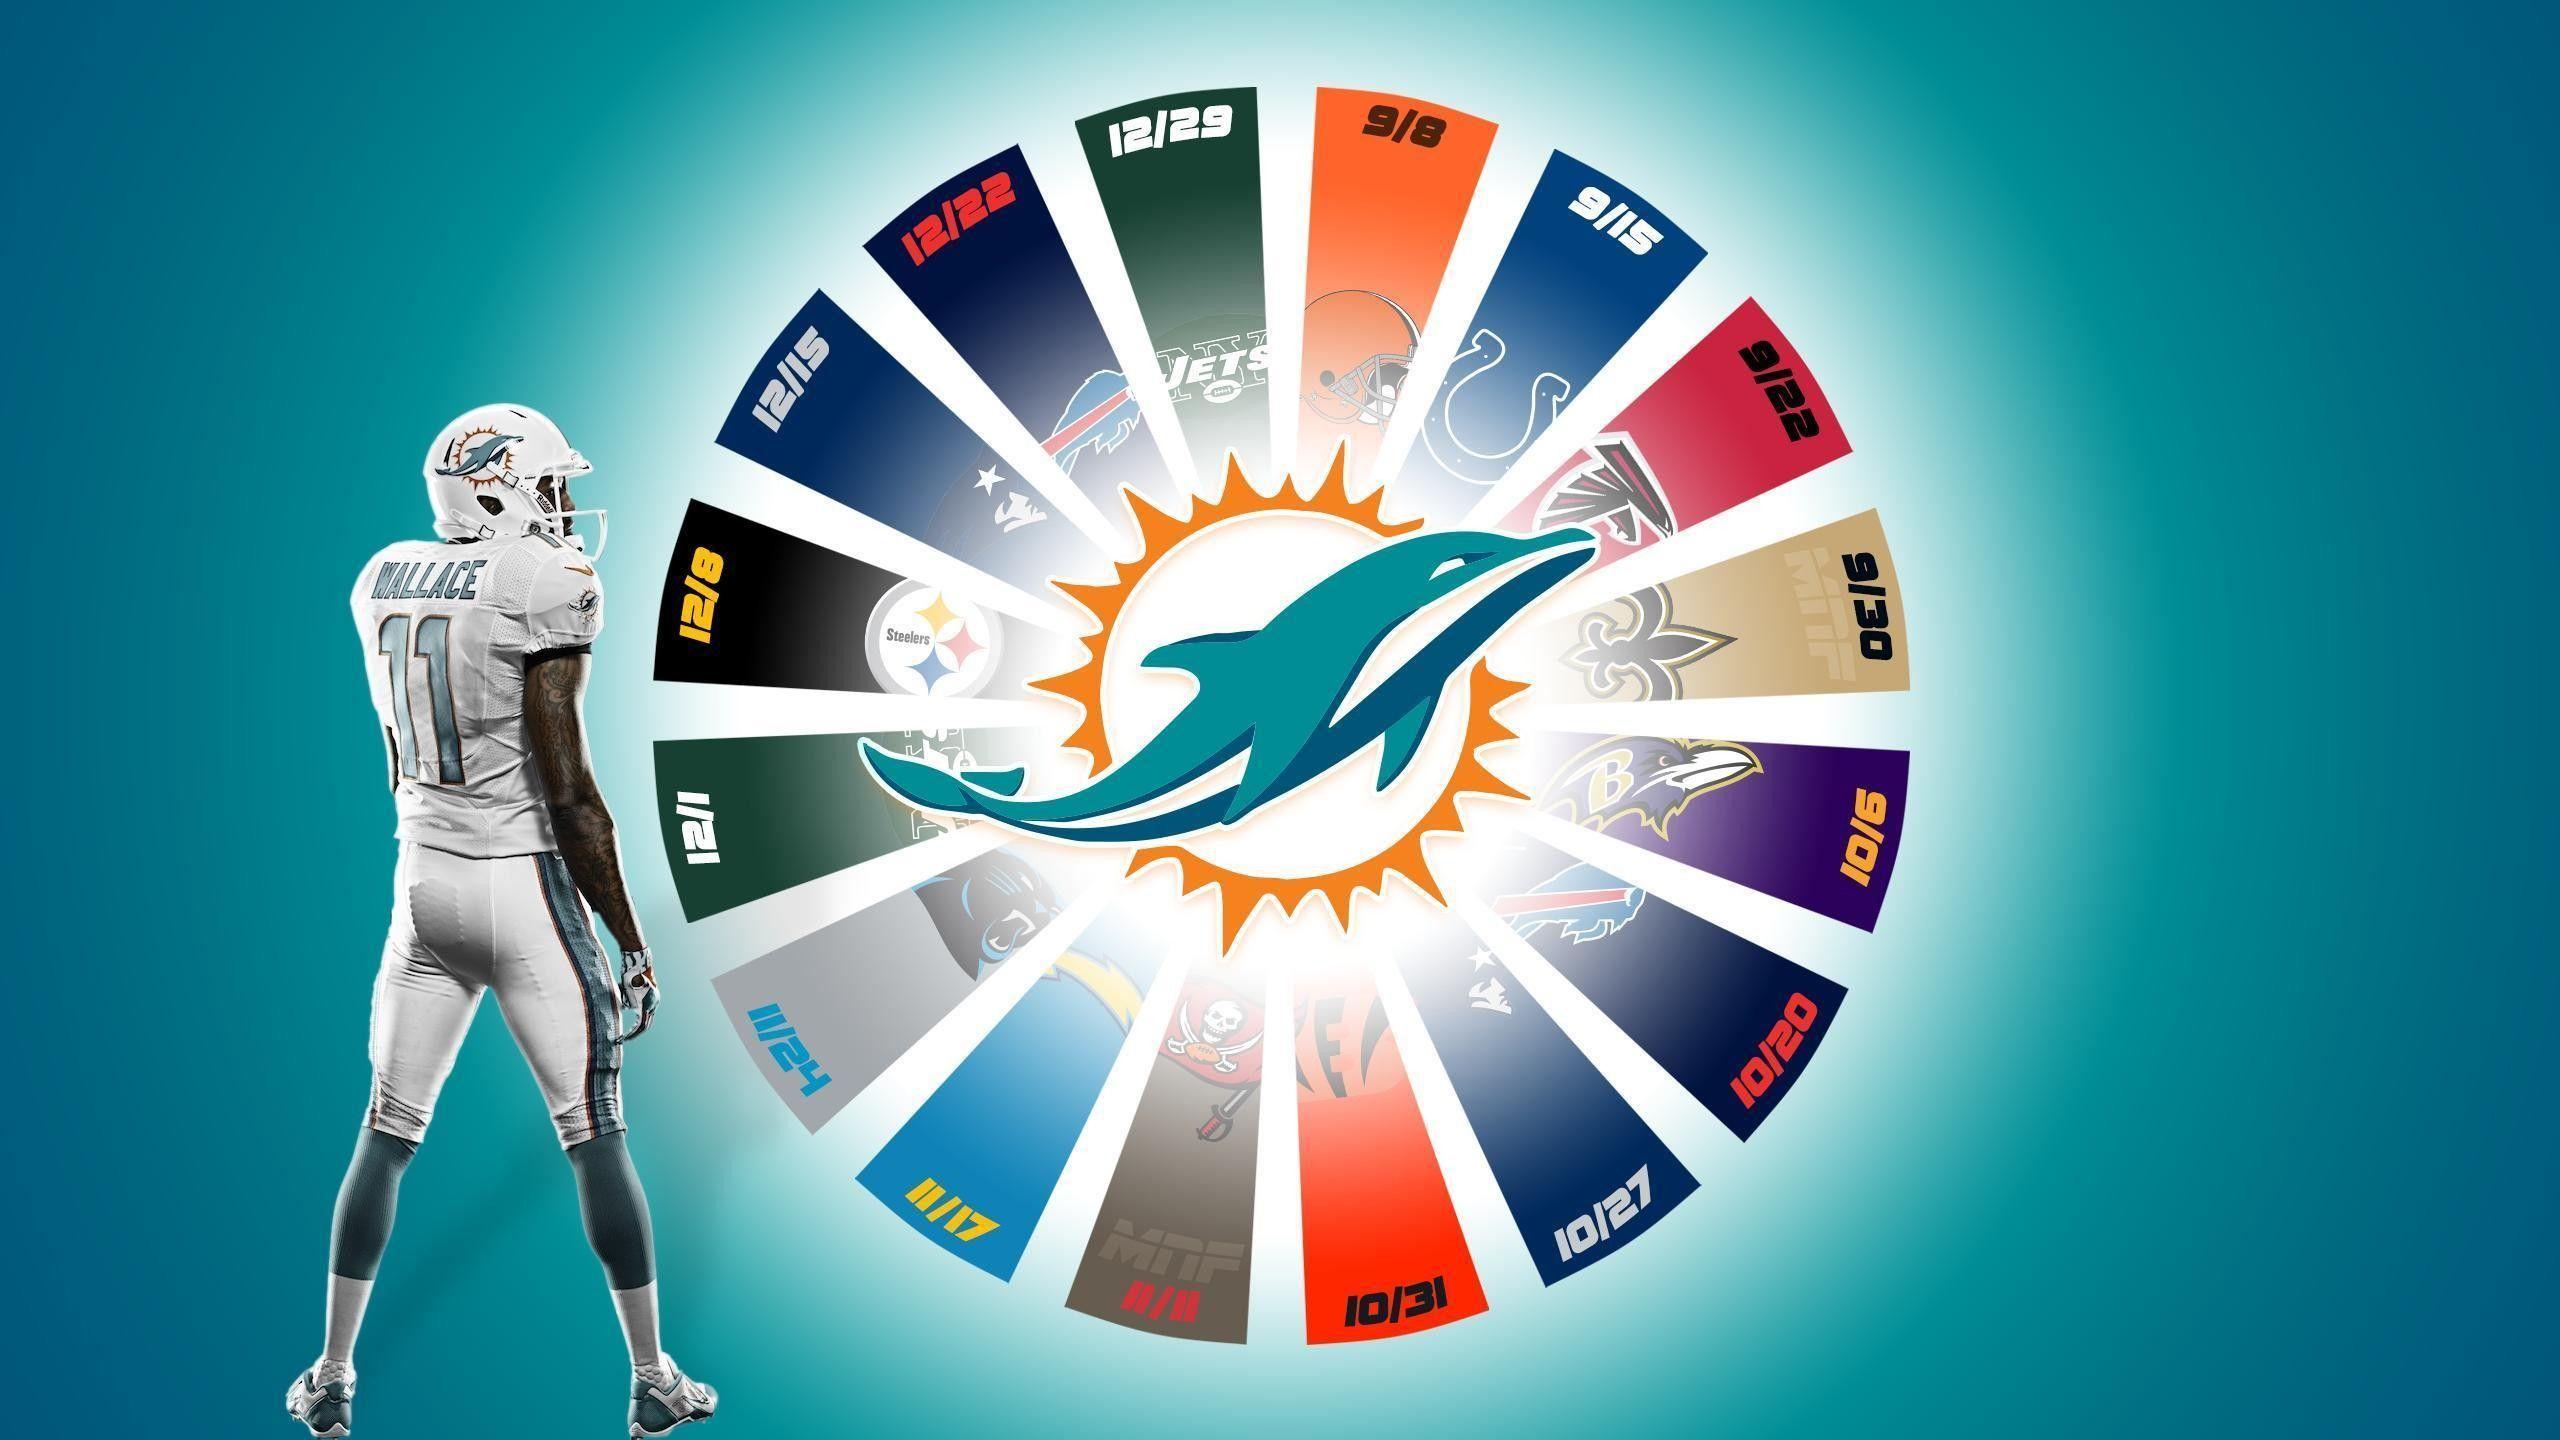 Miami Dolphins Logo Wallpaper Hd Background Miami Dolphins Logo Picture  Background Image And Wallpaper for Free Download